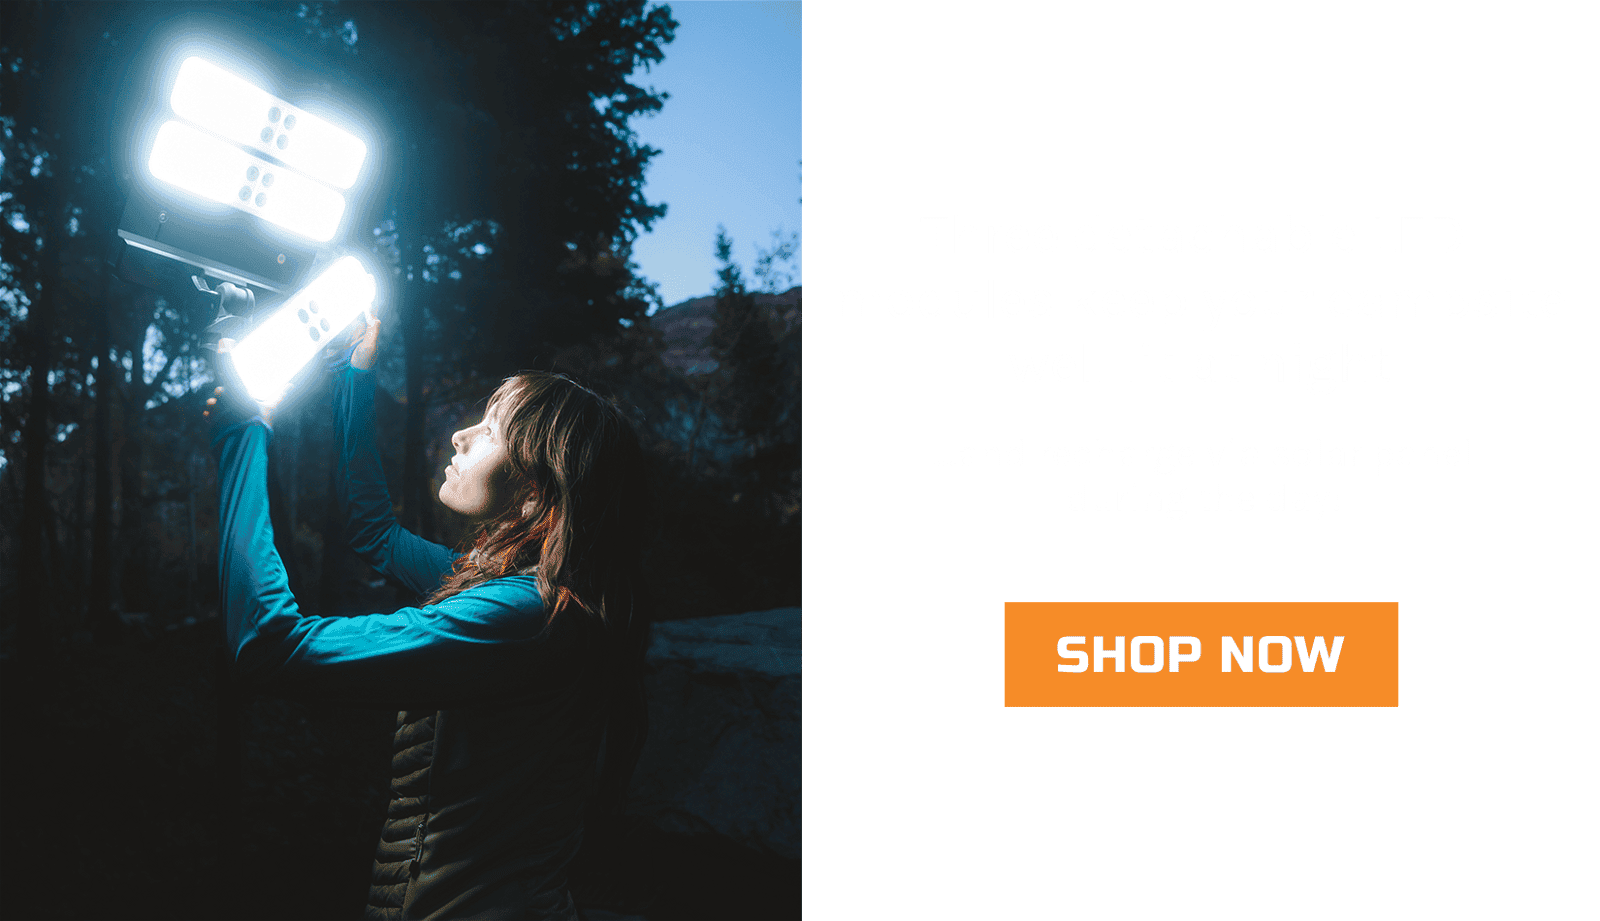 Three detachable LED modules kee your campsite well lit at night